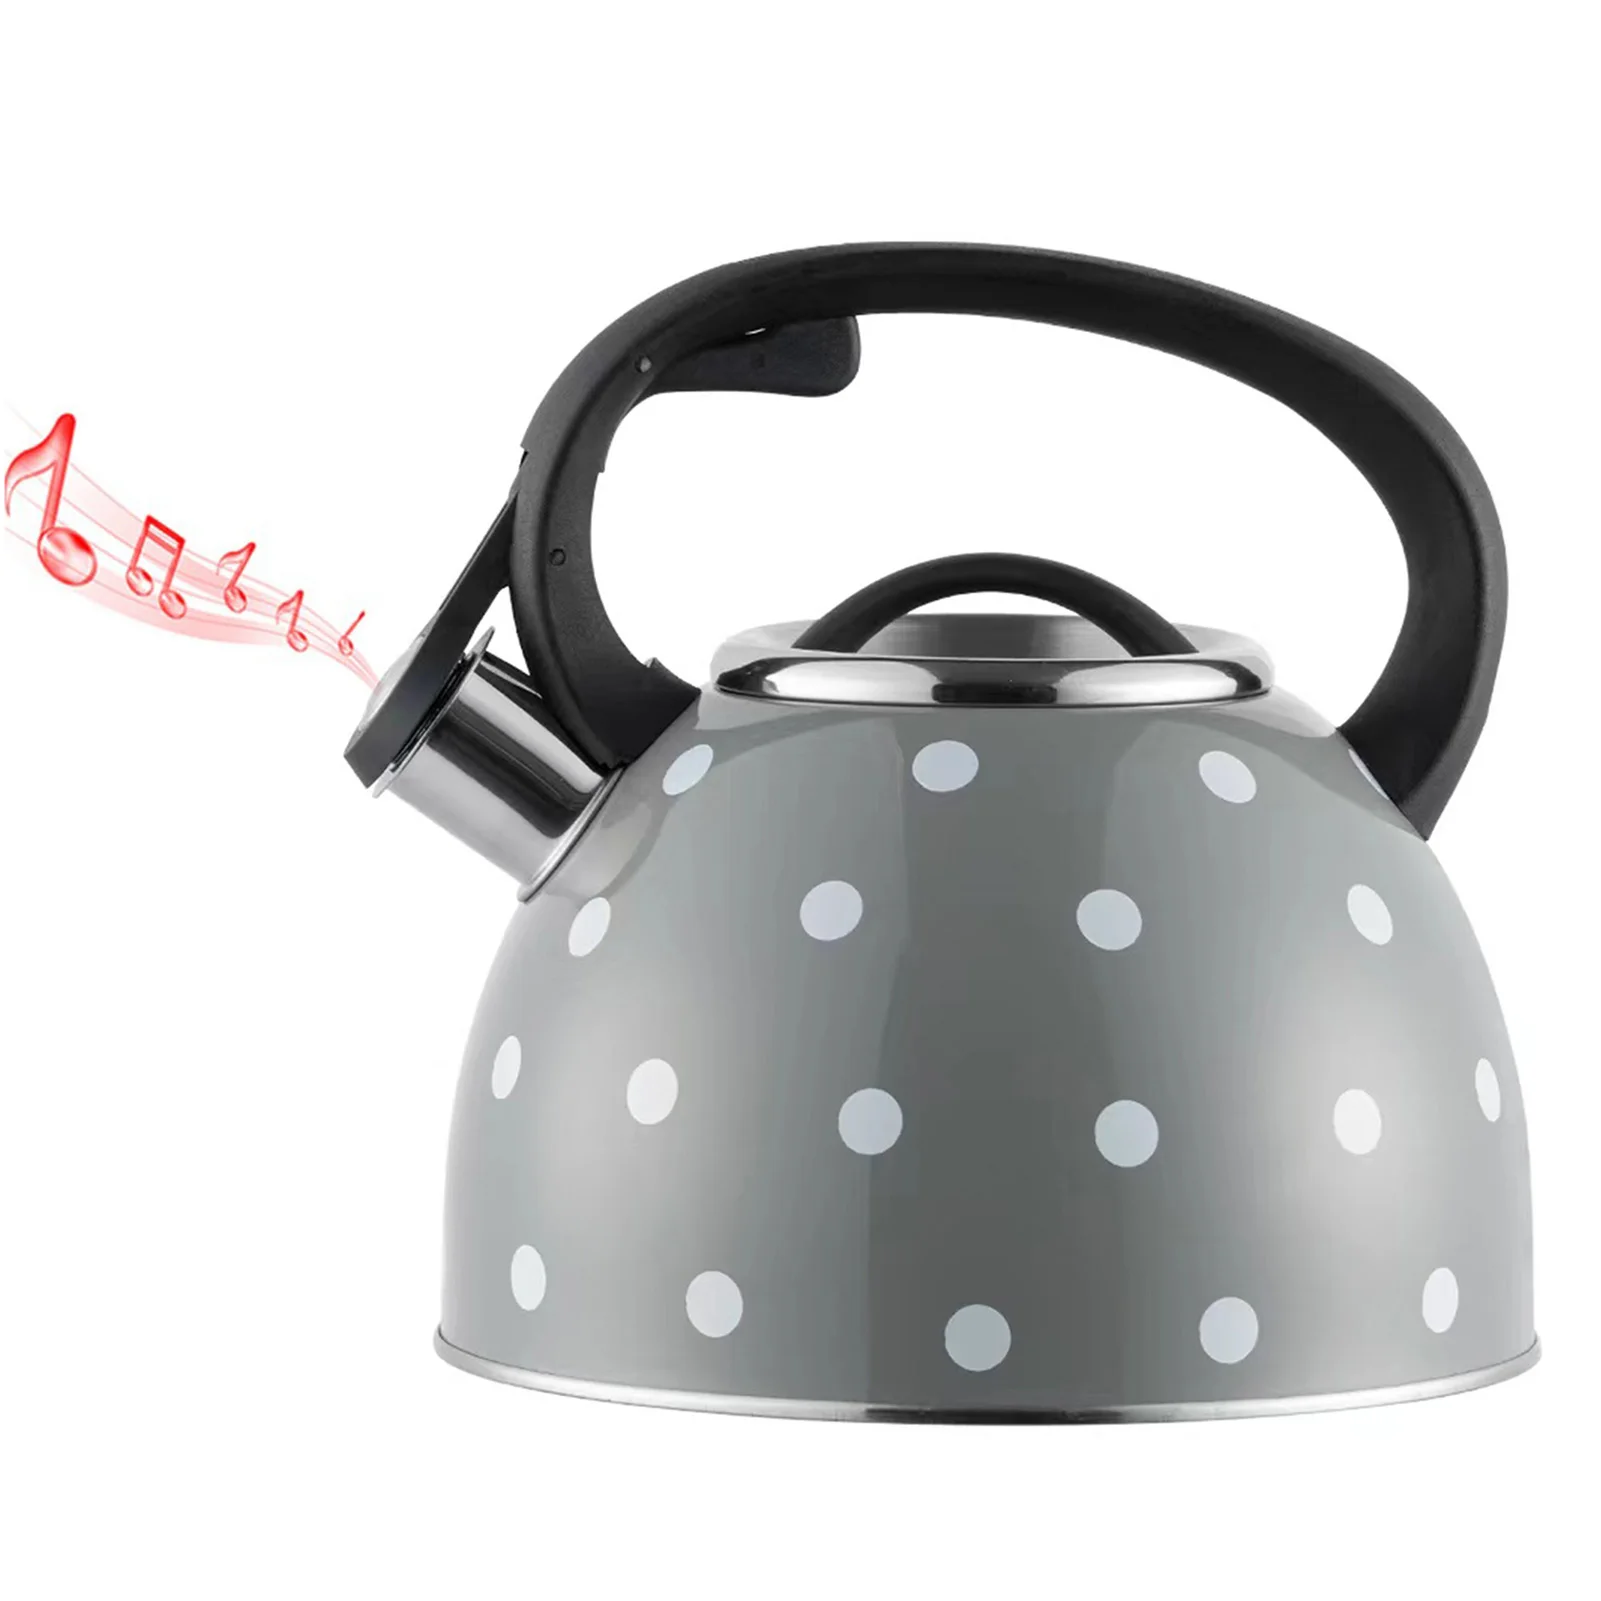 

3L Stainless Steel Stovetop Kettle Whistle Pot Large Capacity Camping Whistling Teakettle Teapot Kitchen Stove Tea Coffee Kettle